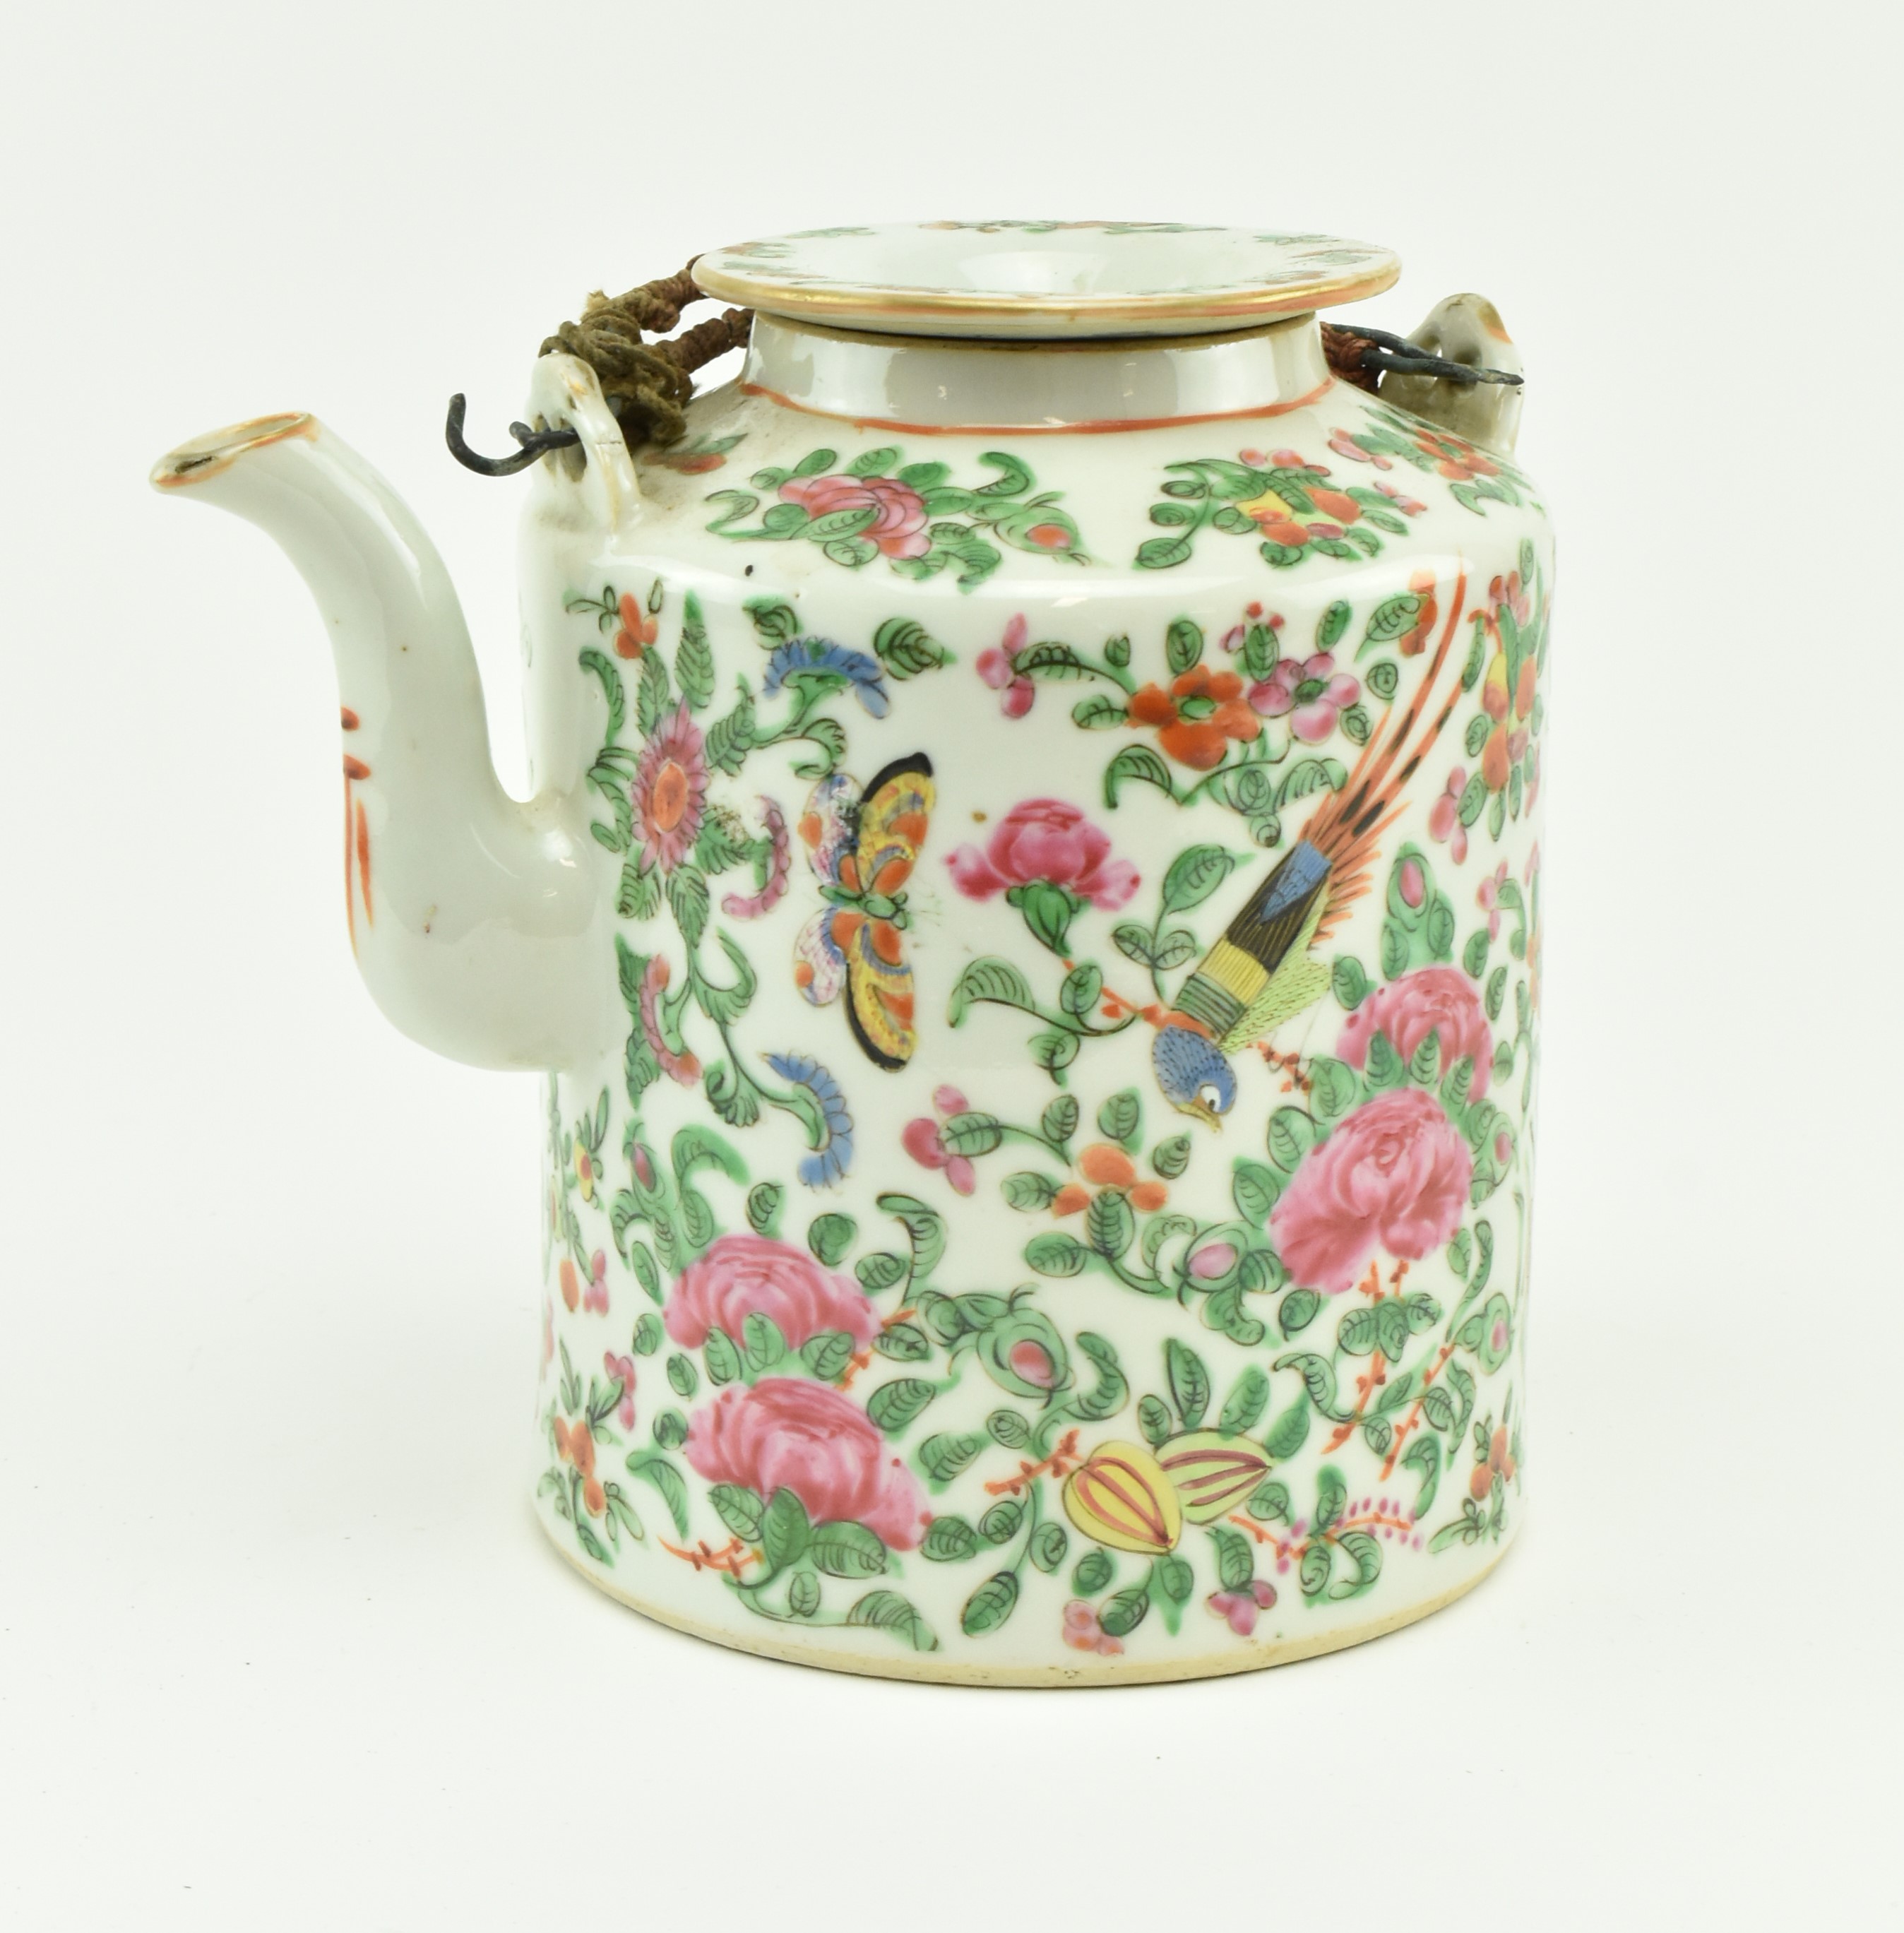 20TH CENTURY FAMILLE ROSE FLOWERS AND BIRDS HANDLED TEAPOT